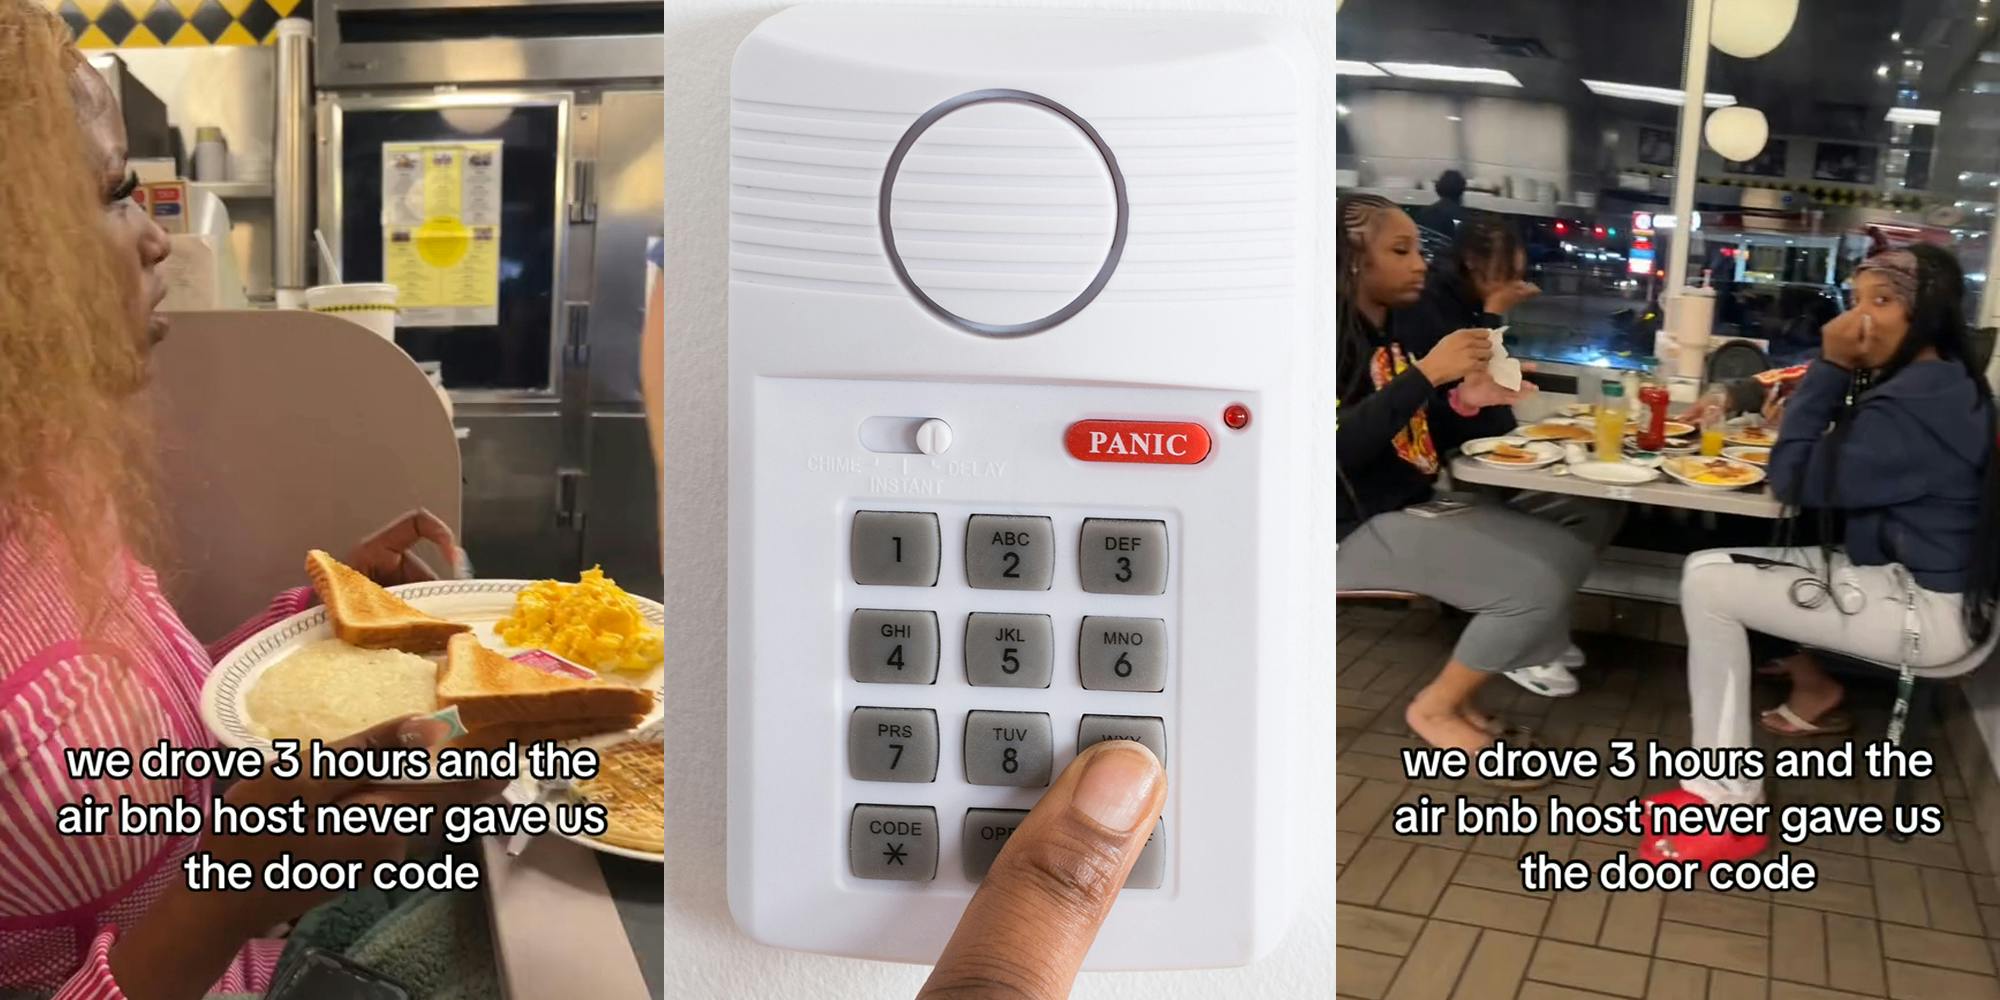 young women in Waffle House with caption "we drove 3 hours and the air bnb host never gave us the door code" (l&r) door lock key code panel (c)